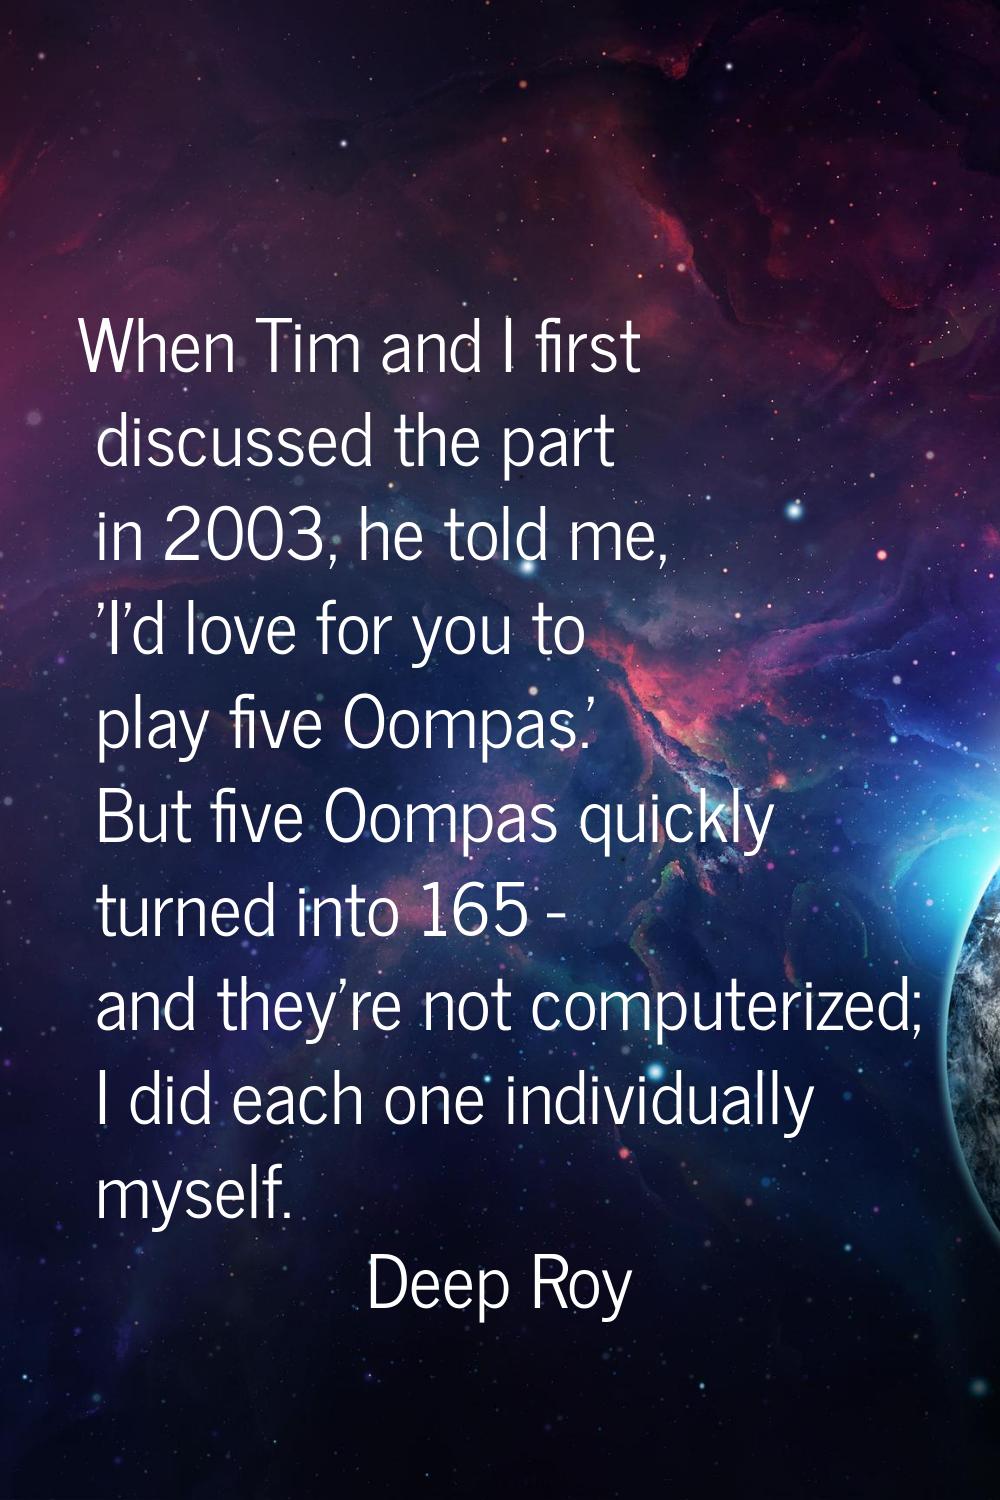 When Tim and I first discussed the part in 2003, he told me, 'I'd love for you to play five Oompas.